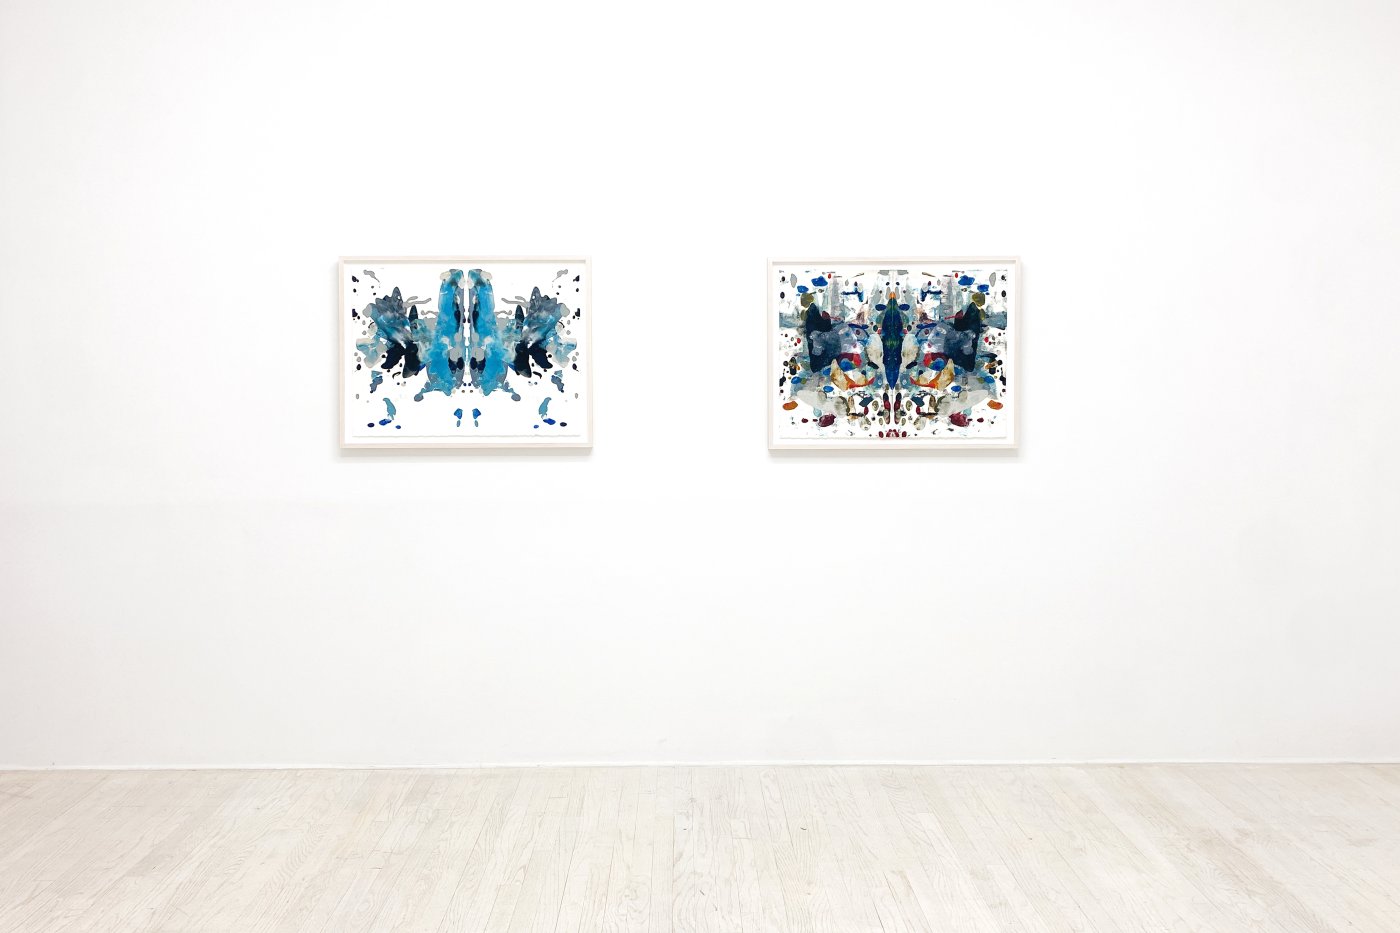 Installation image for Bruce Conner & Adam Helms, at Halsey McKay Gallery